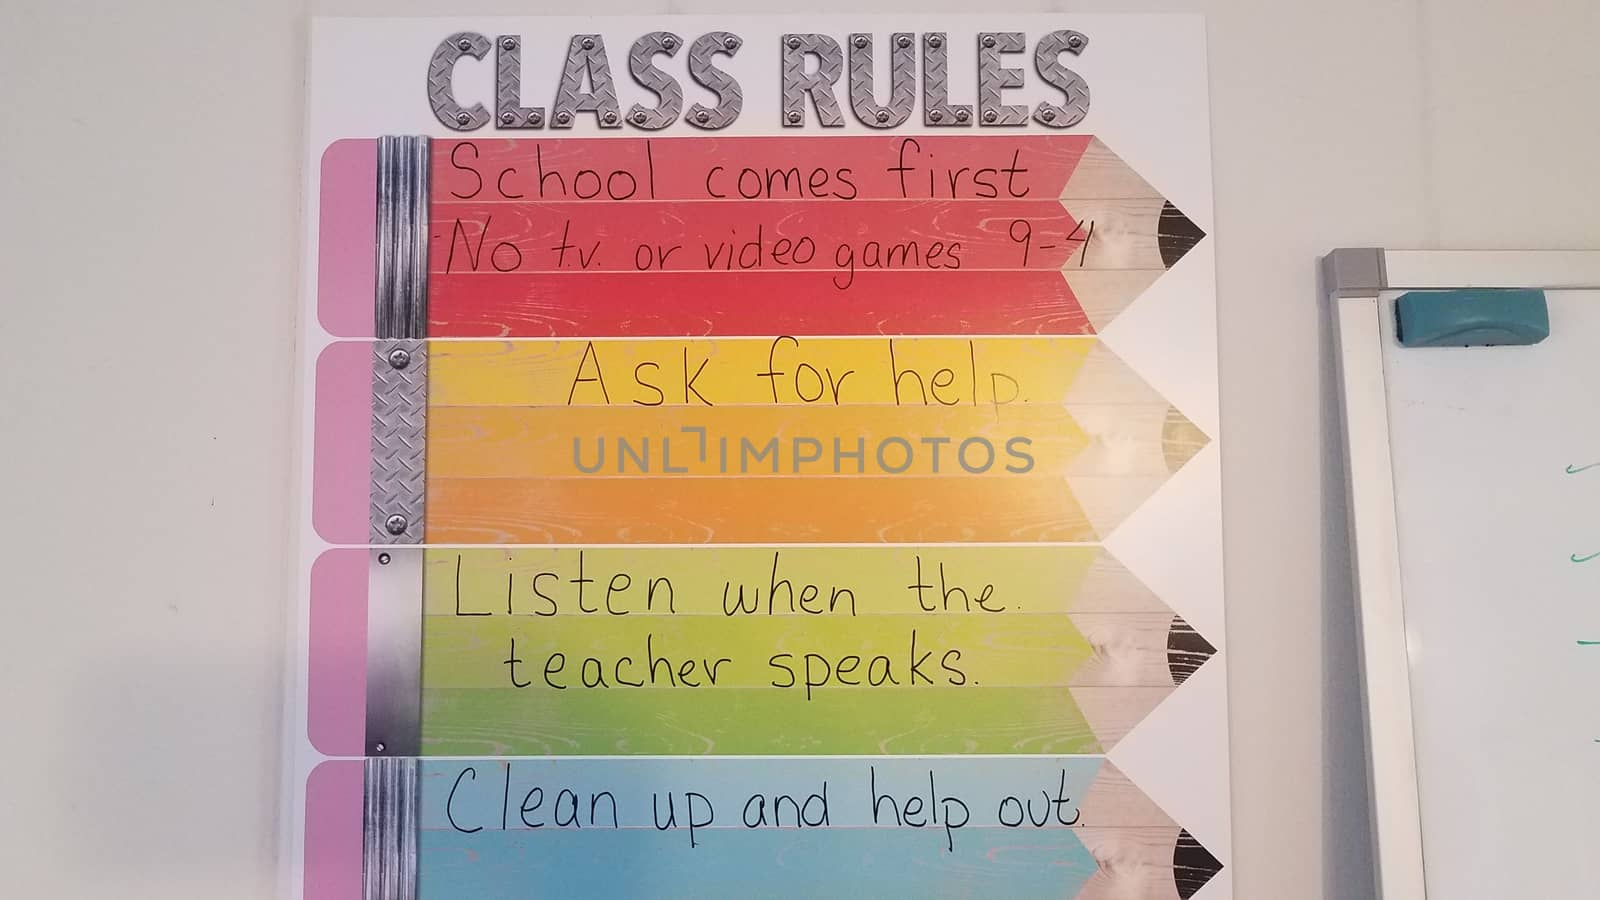 poster of class rules on wall with pencils by stockphotofan1